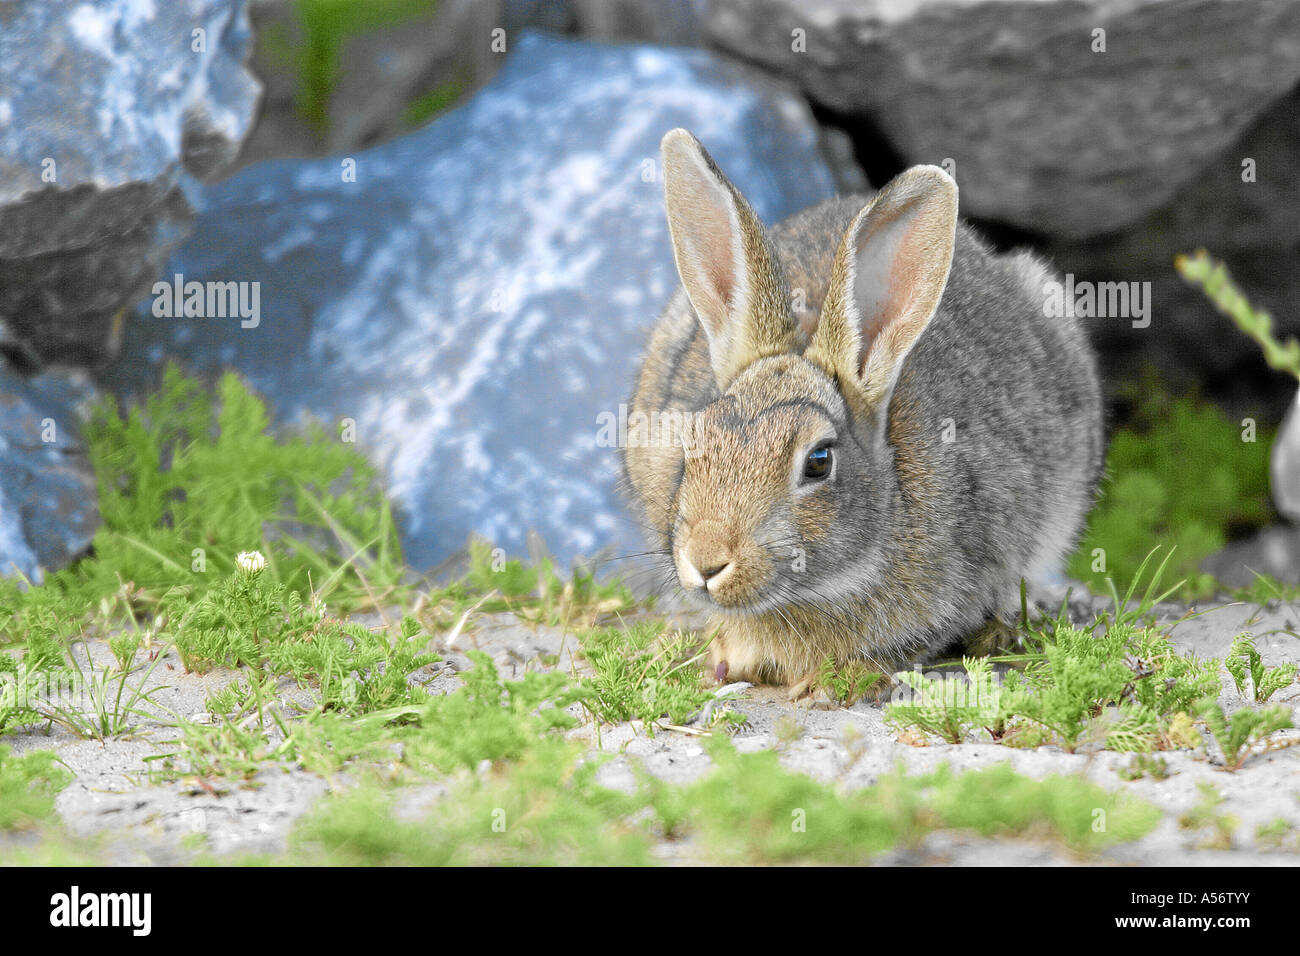 Wildkaninchen lapin sauvage Europe Banque D'Images